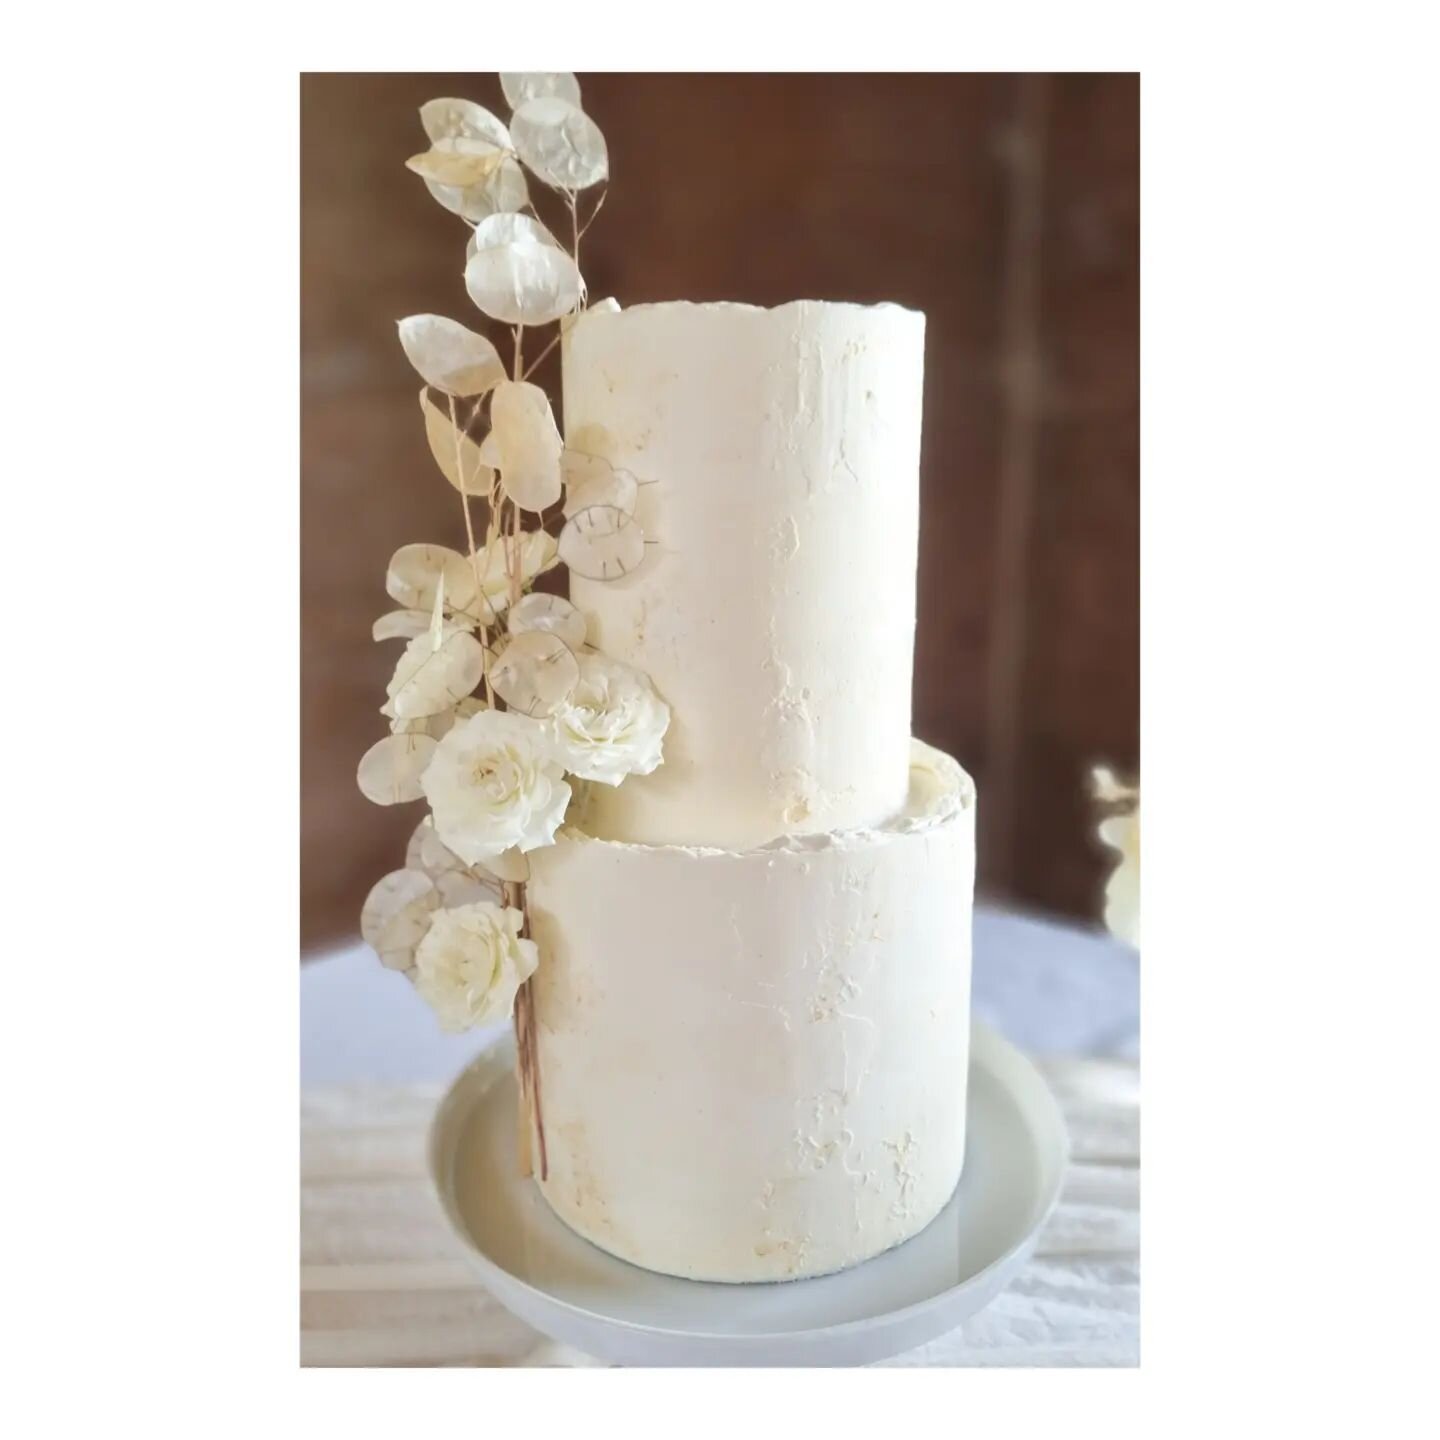 Understated elegance for M&amp;S's stunning day @elmorecourt last month 🧡🧡🧡

Thank you to @amberpersia for the gorgeous fresh flowers and to @snowdrops_studio for the beautiful dried flowers xx

This was my first all white cake, and I love it, esp